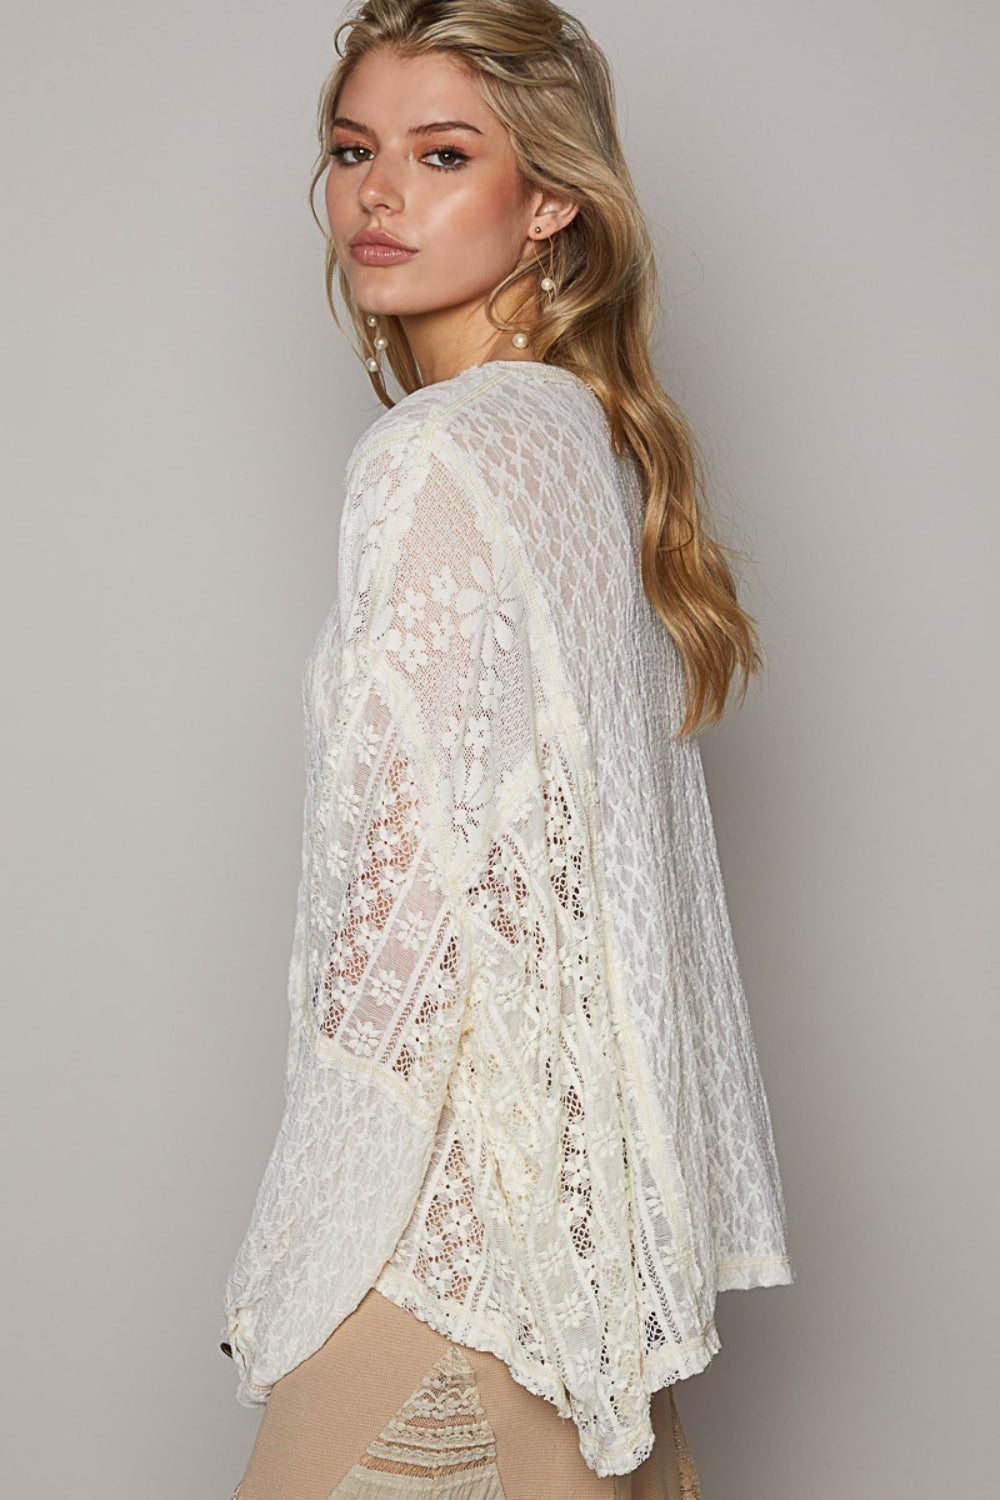 Zia - Round Neck Long Sleeve Raw Edge Lace Top - Cream - Exclusively Online